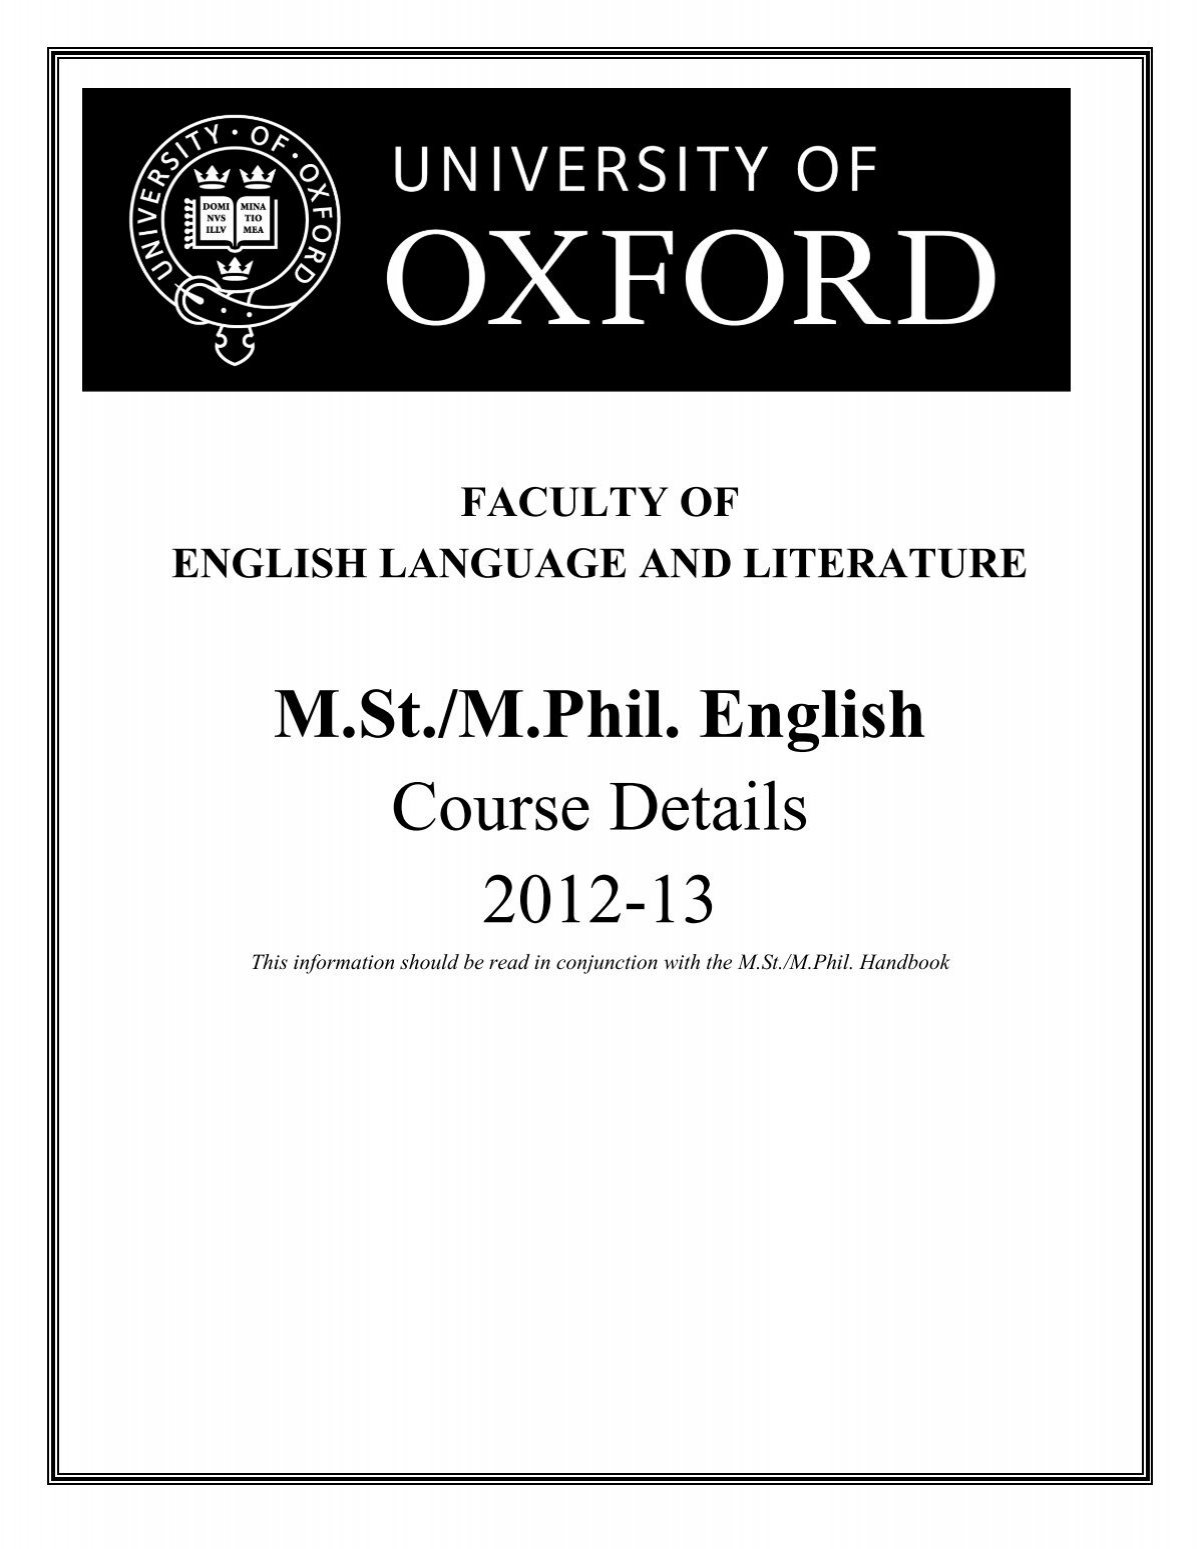 Mst Mphil Course Details 12 13 Pdf Faculty Of English